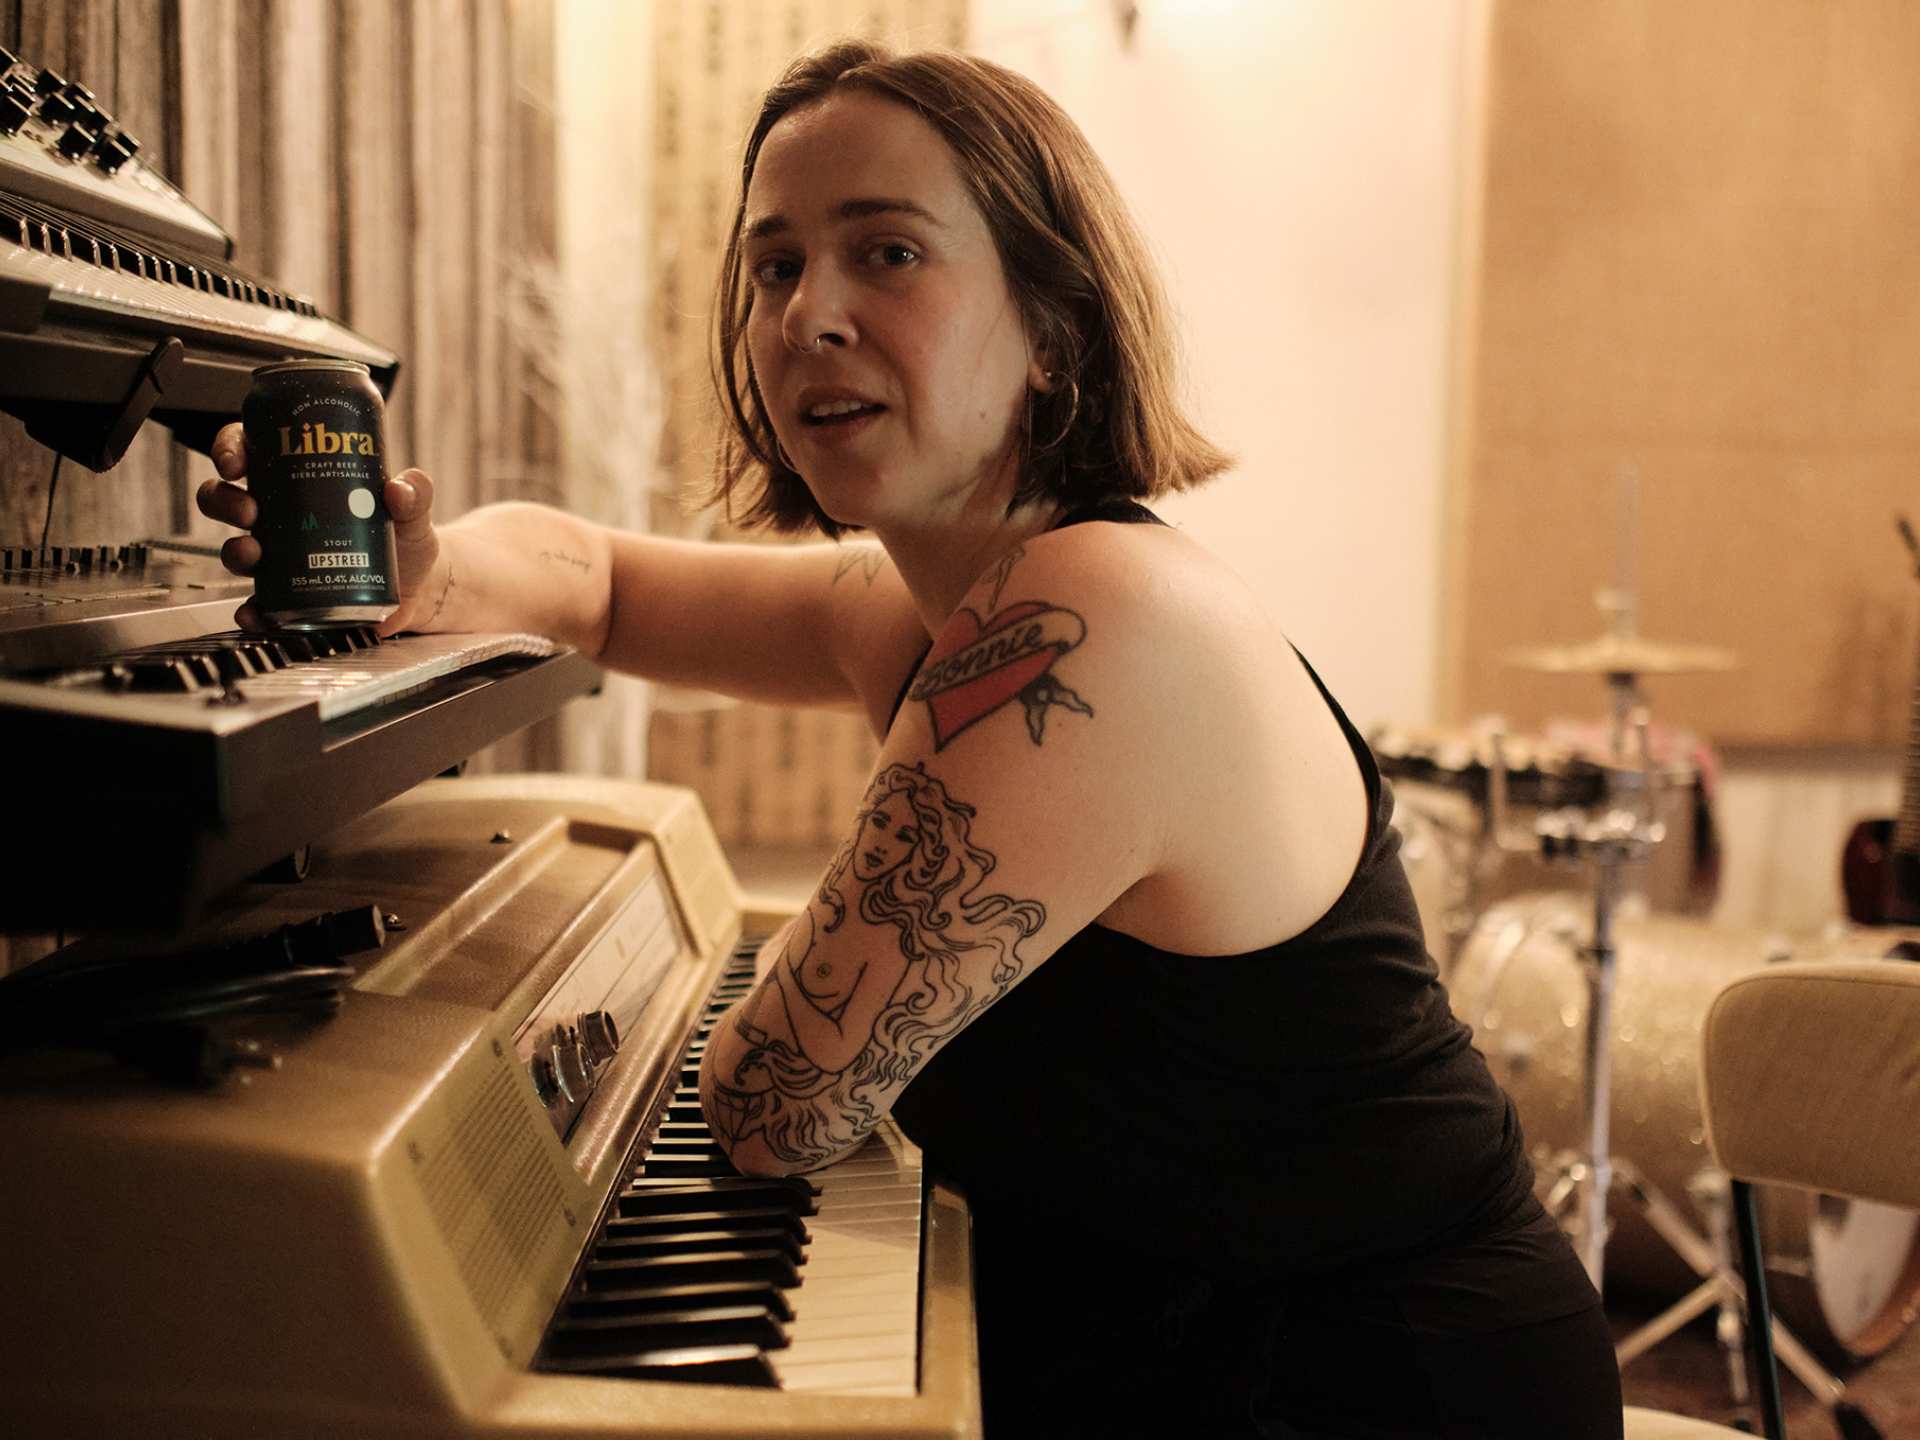 Serena Ryder leaning on her piano with a can of Libra non-alcoholic craft beer